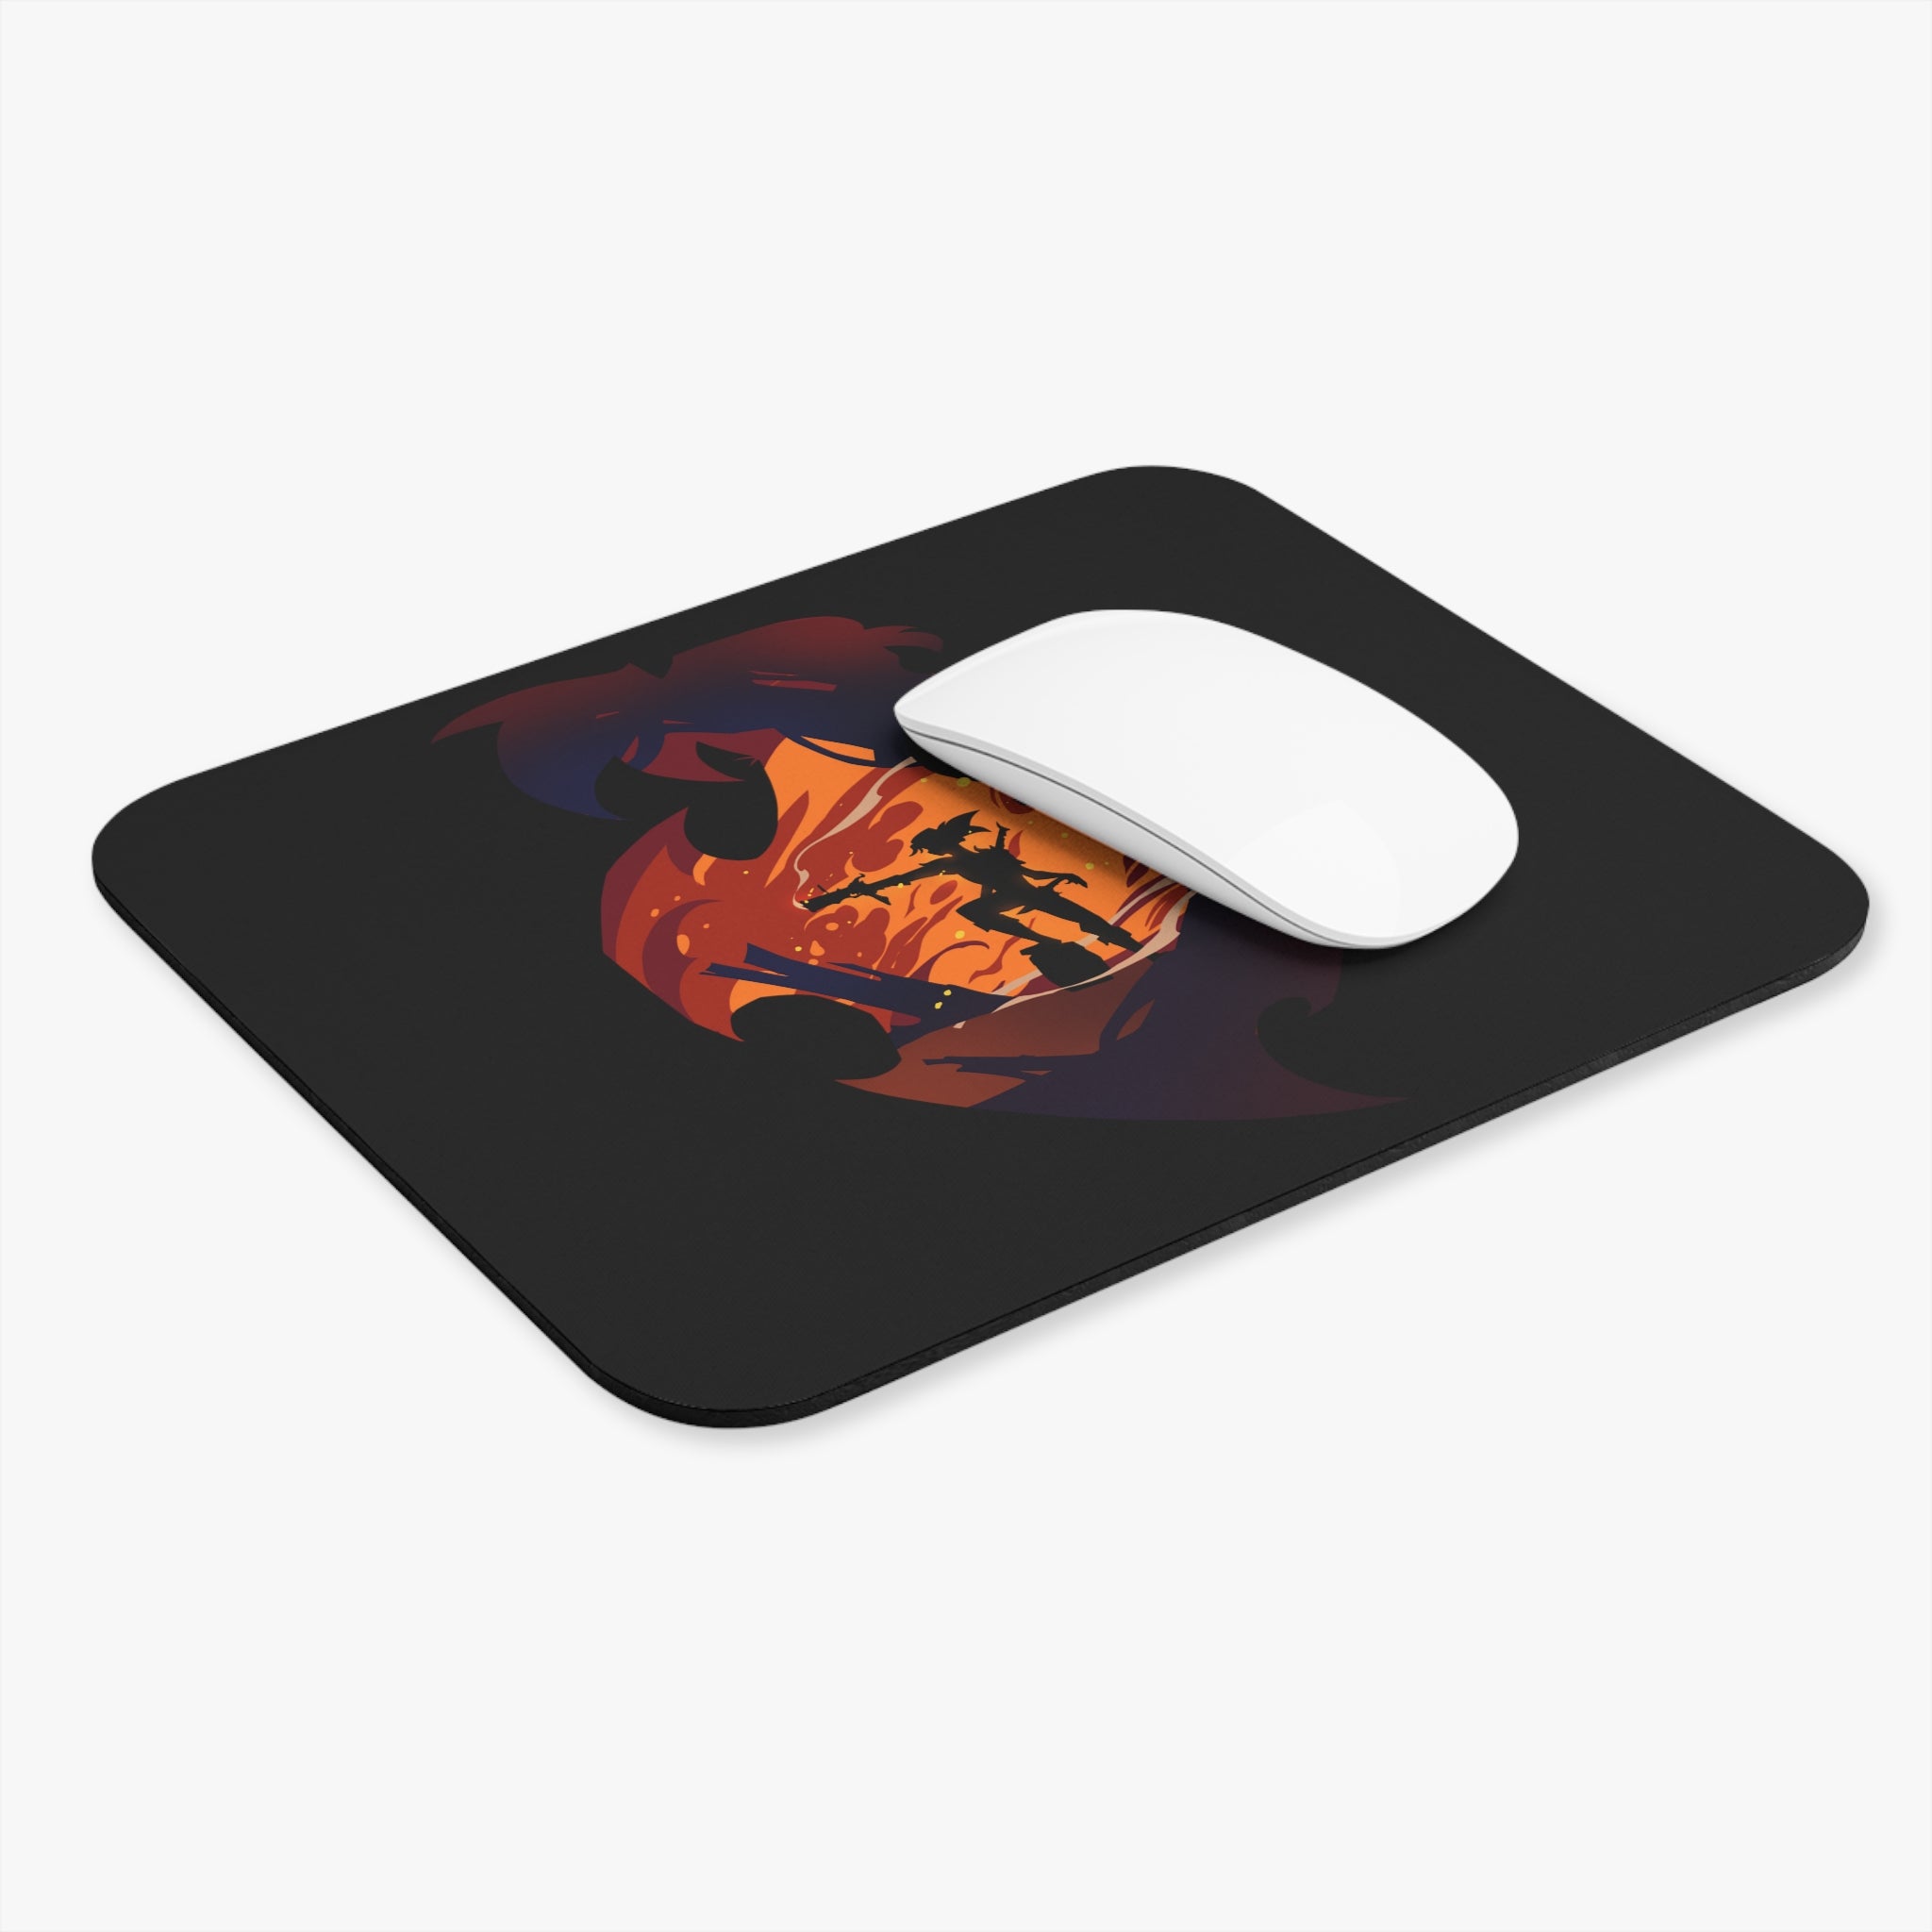 FIGHTER CLASS SILHOUETTE RECTANGLER MOUSE PAD